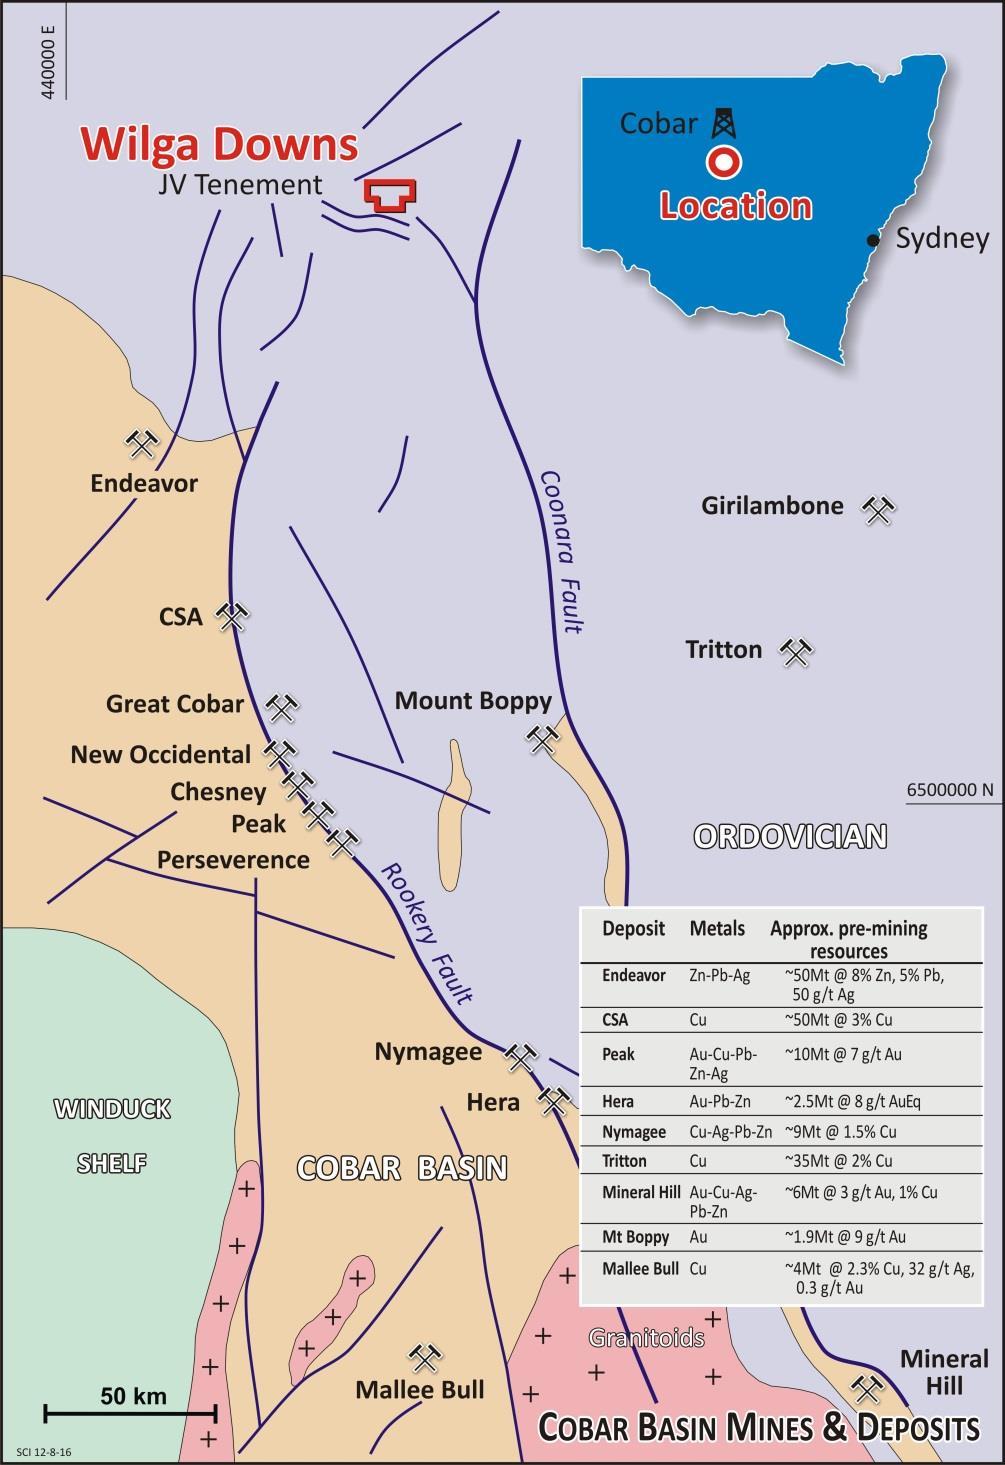 Wilga Downs Cobar Mining District Numerous, long-lived mines Copper, Lead, Zinc, Silver and Gold Coincident geophysical